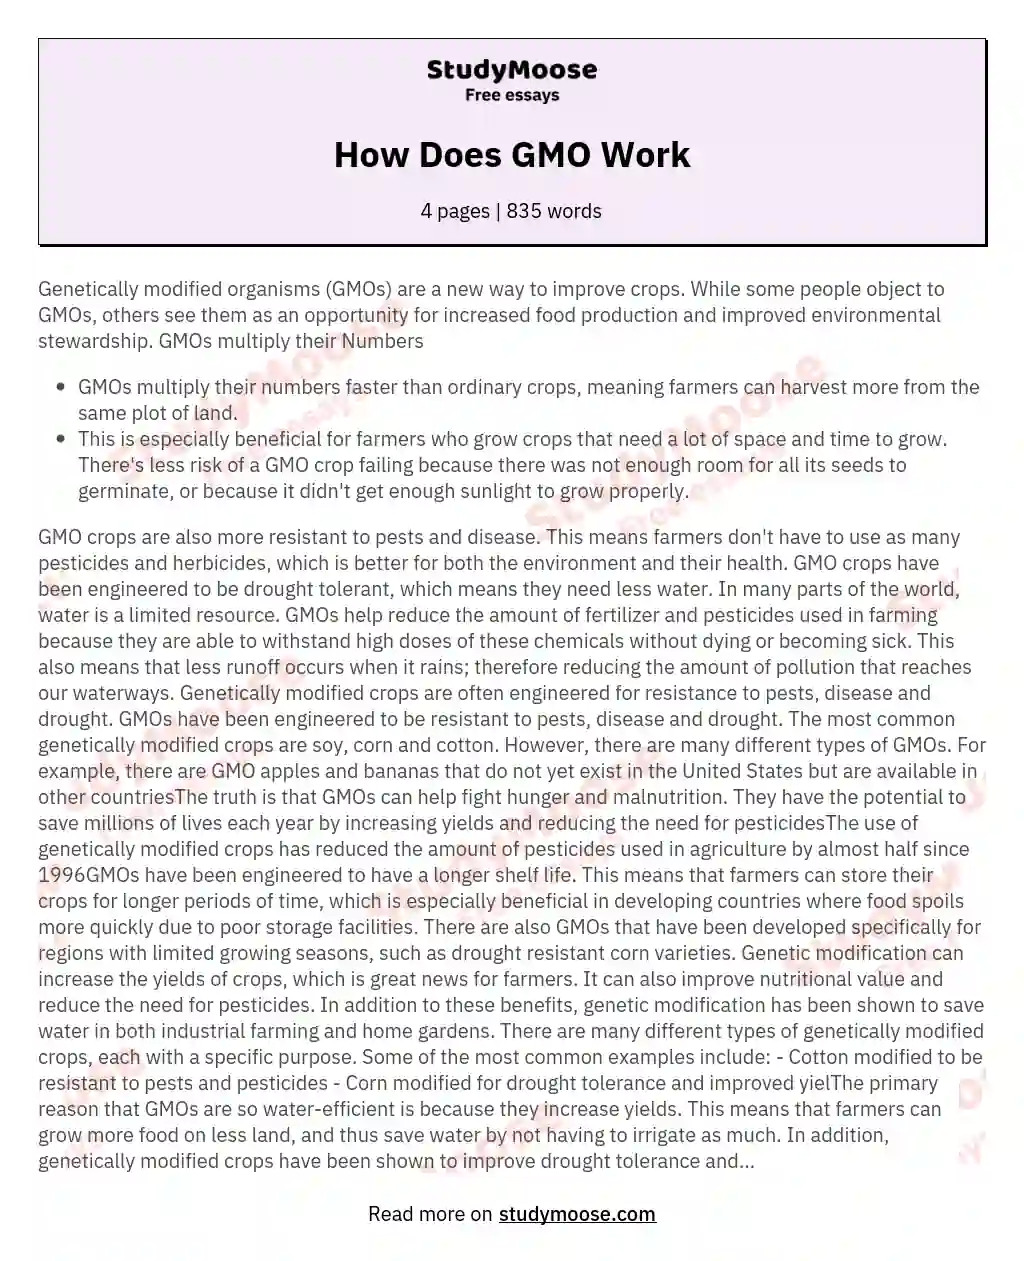 How Does GMO Work essay